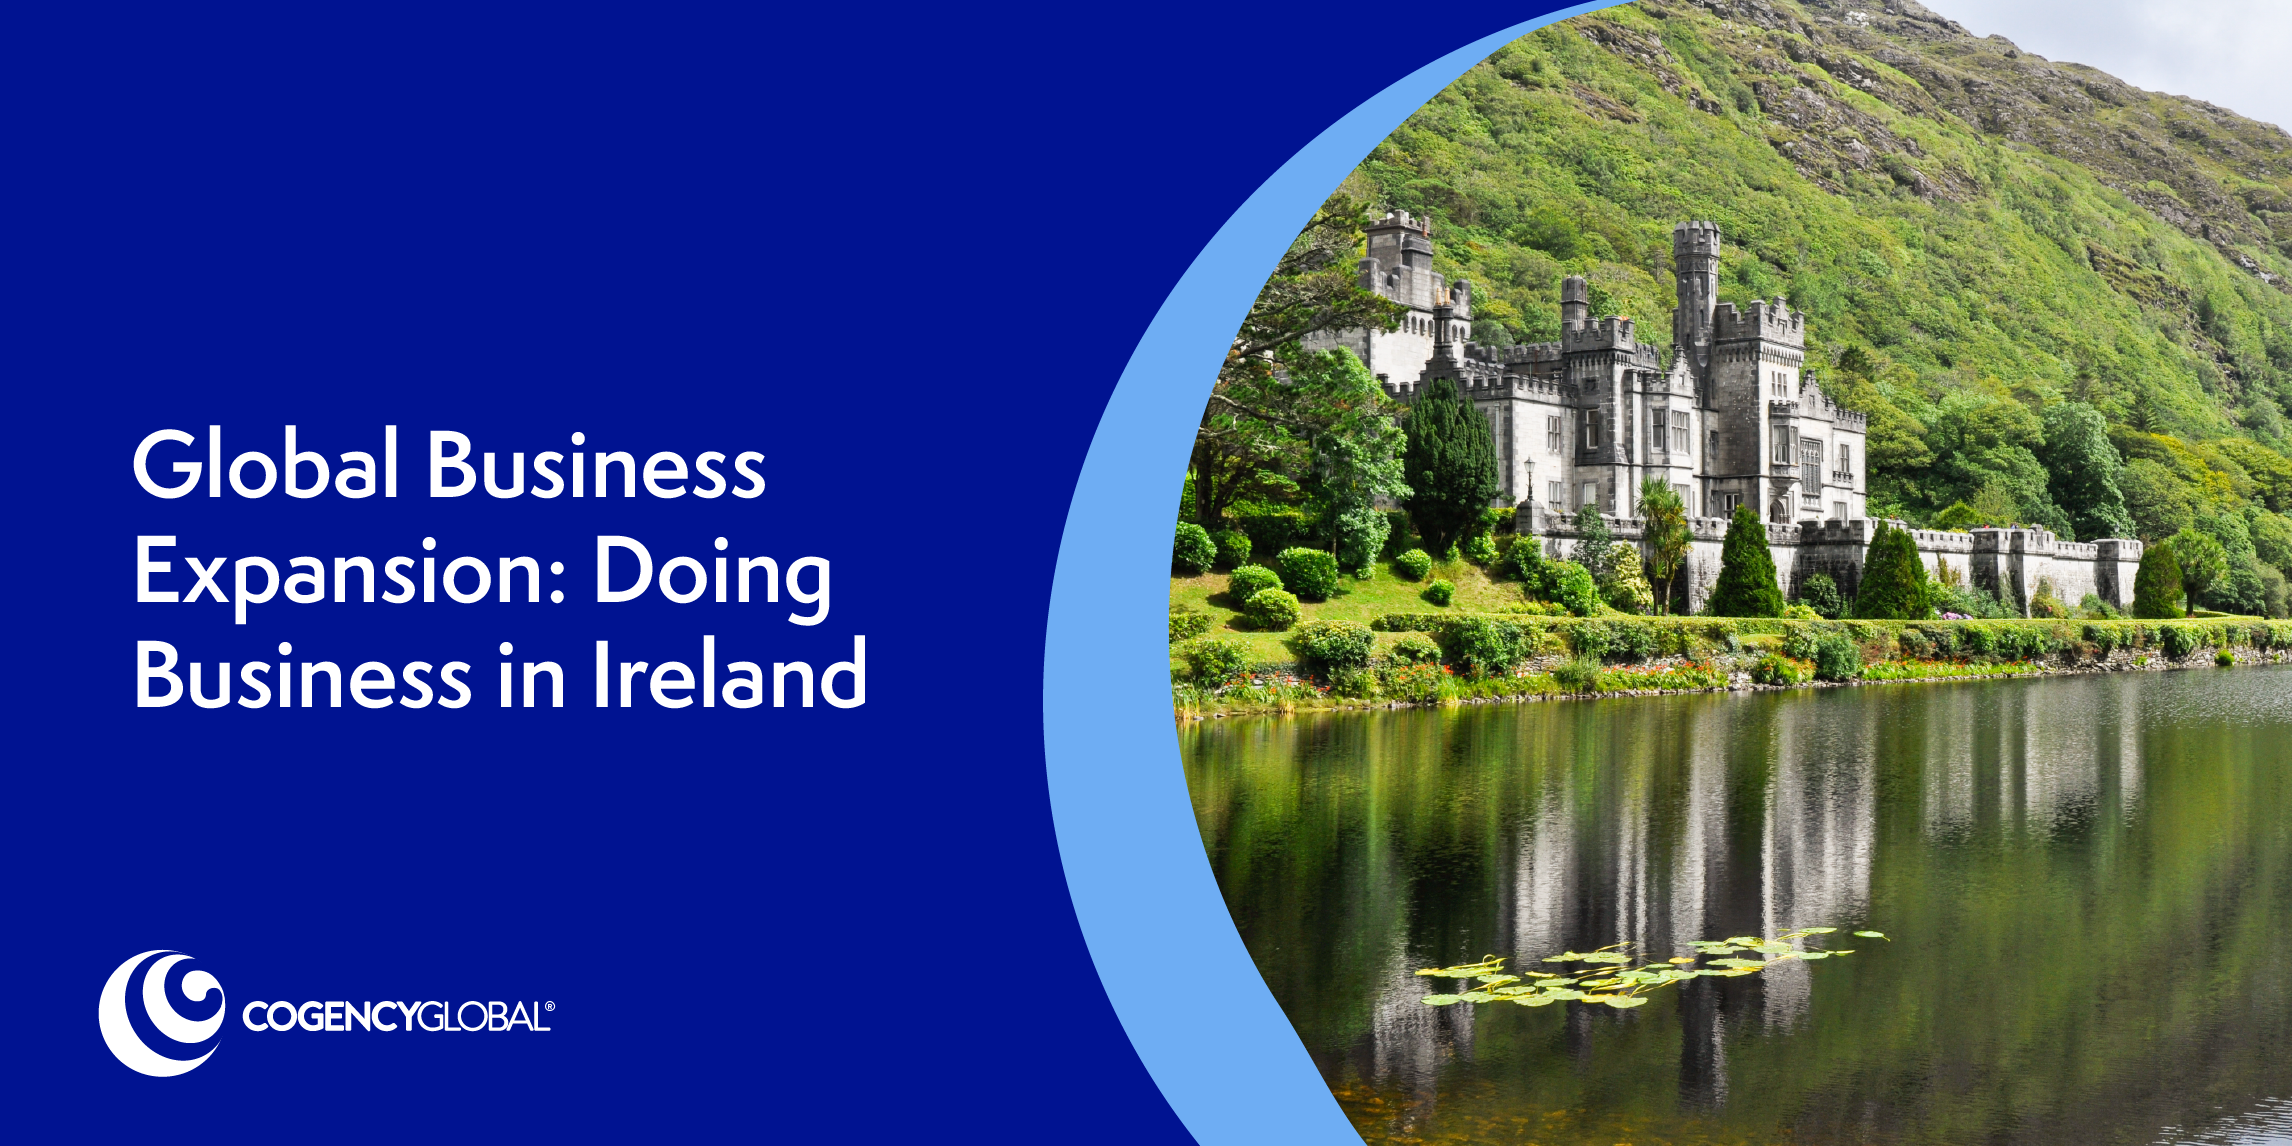 Global Business Expansion: Doing Business in Ireland